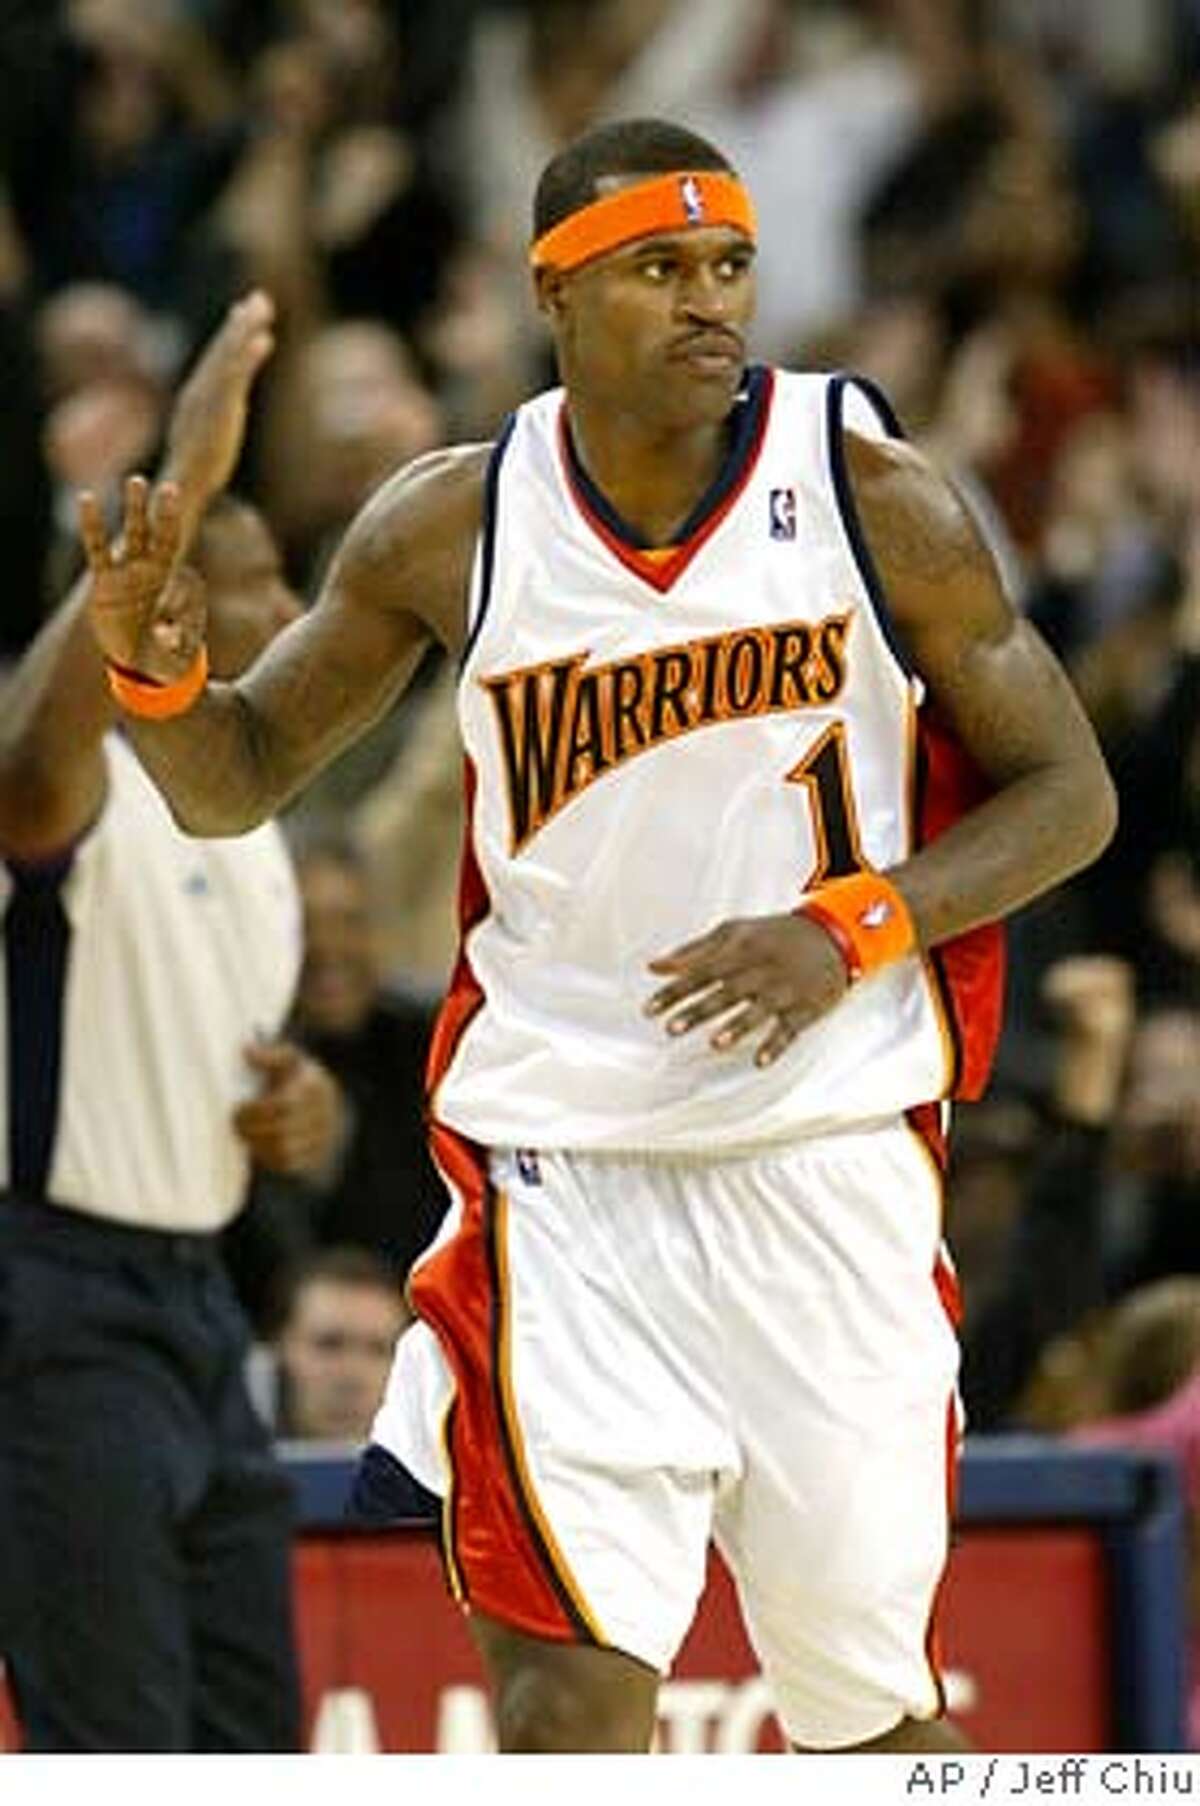 ** ADVANCE FOR WEEKEND EDITIONS, DEC. 8-9 ** Golden State Warriors guard Stephen Jackson (1) celebrates after making a three-pointer against the Orlando Magic in the fourth quarter of an NBA basketball game on Monday, Dec. 3, 2007, in Oakland, Calif. The Magic won 123-117 in overtime. Jackson's arrival in Golden State last season helped turned the Warriors from a sorry franchise that had missed the playoffs for 12 straight seasons into a team that went on a magical playoff run. His return from a seven-game suspension to open this season has had similar results, as the Warriors have overcome an 0-6 start without Captain Jack to get right back to the groove they were in to end last season. (AP Photo/Jeff Chiu) EFE OUT